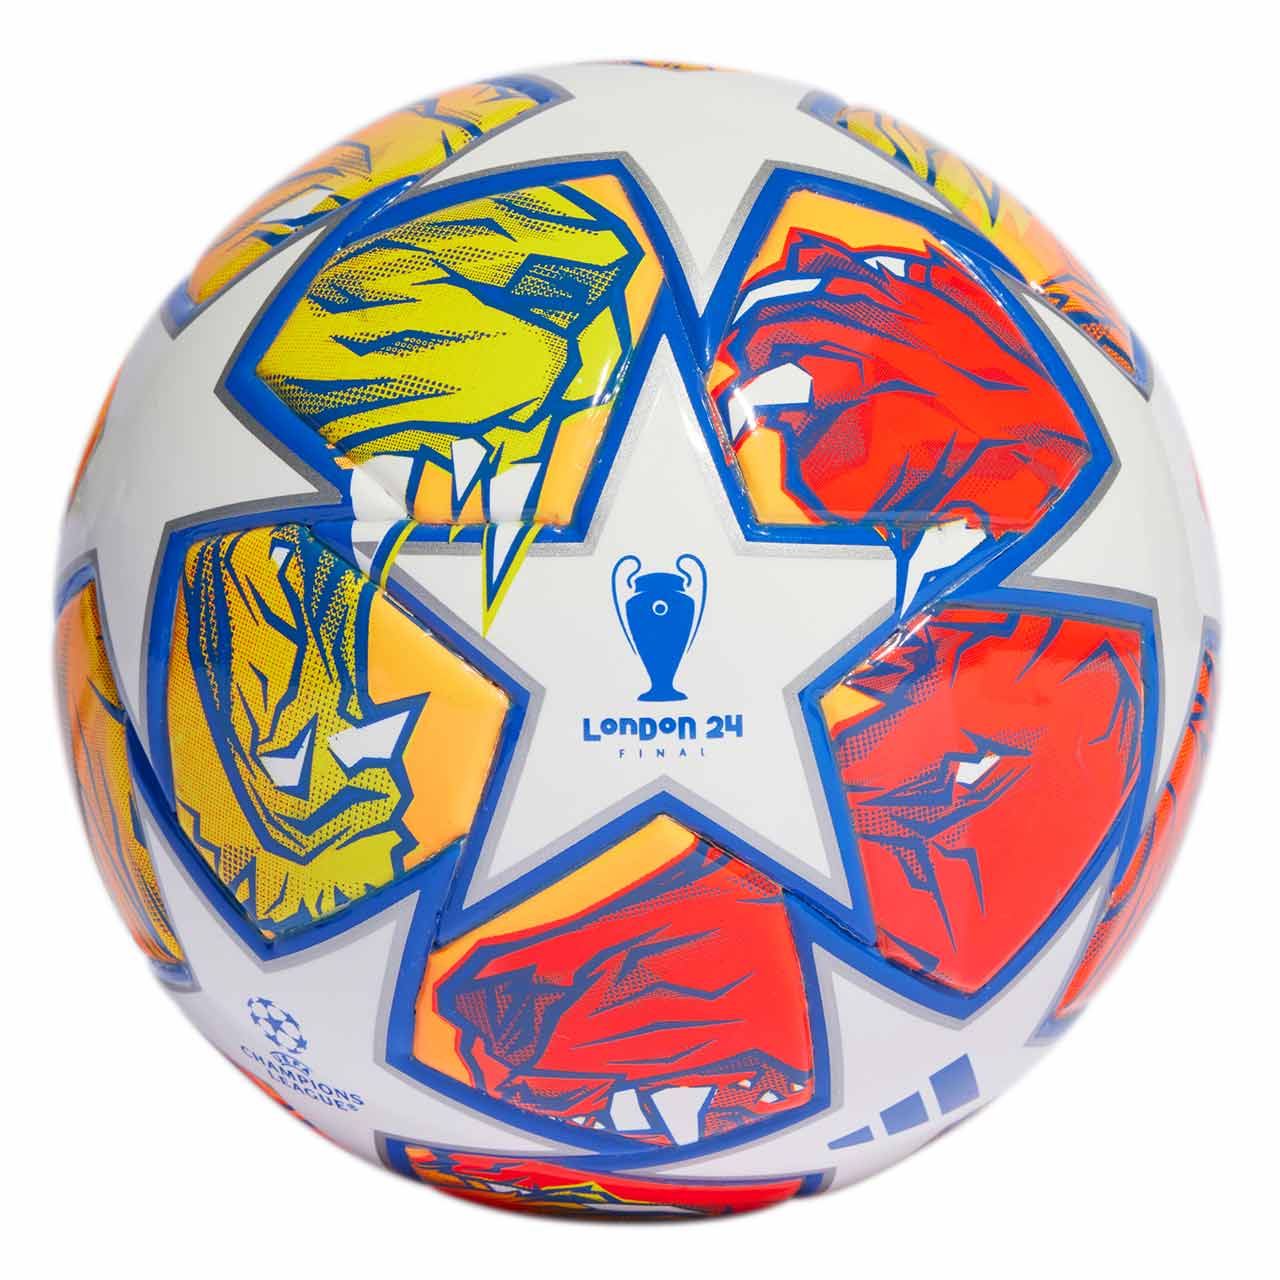 Miniball UCL 23/24 Knock-out